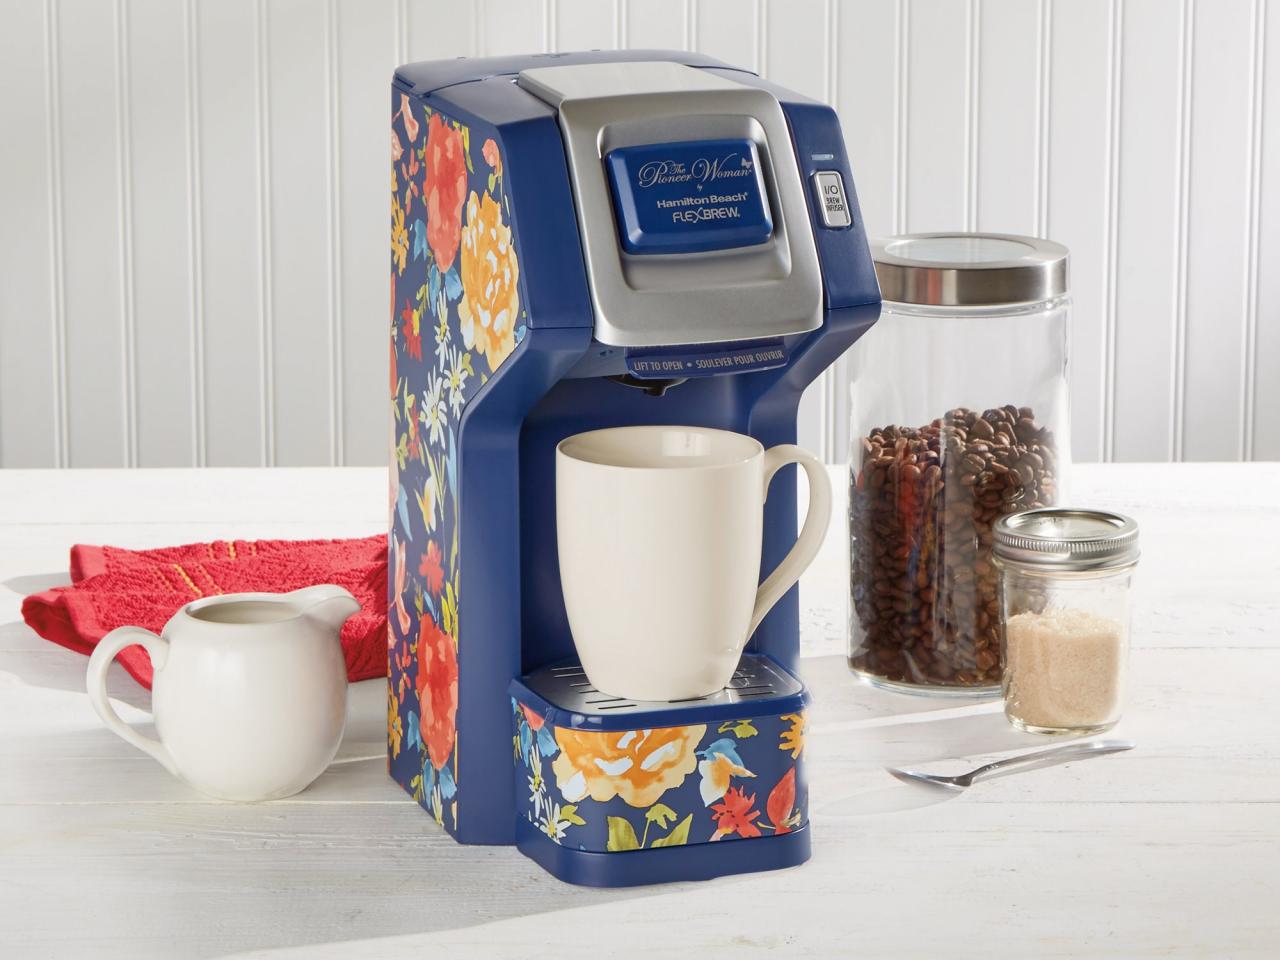 https://food.fnr.sndimg.com/content/dam/images/food/products/2020/2/19/rx_pioneer-woman-coffee-maker.jpeg.rend.hgtvcom.1280.960.suffix/1582136936084.jpeg